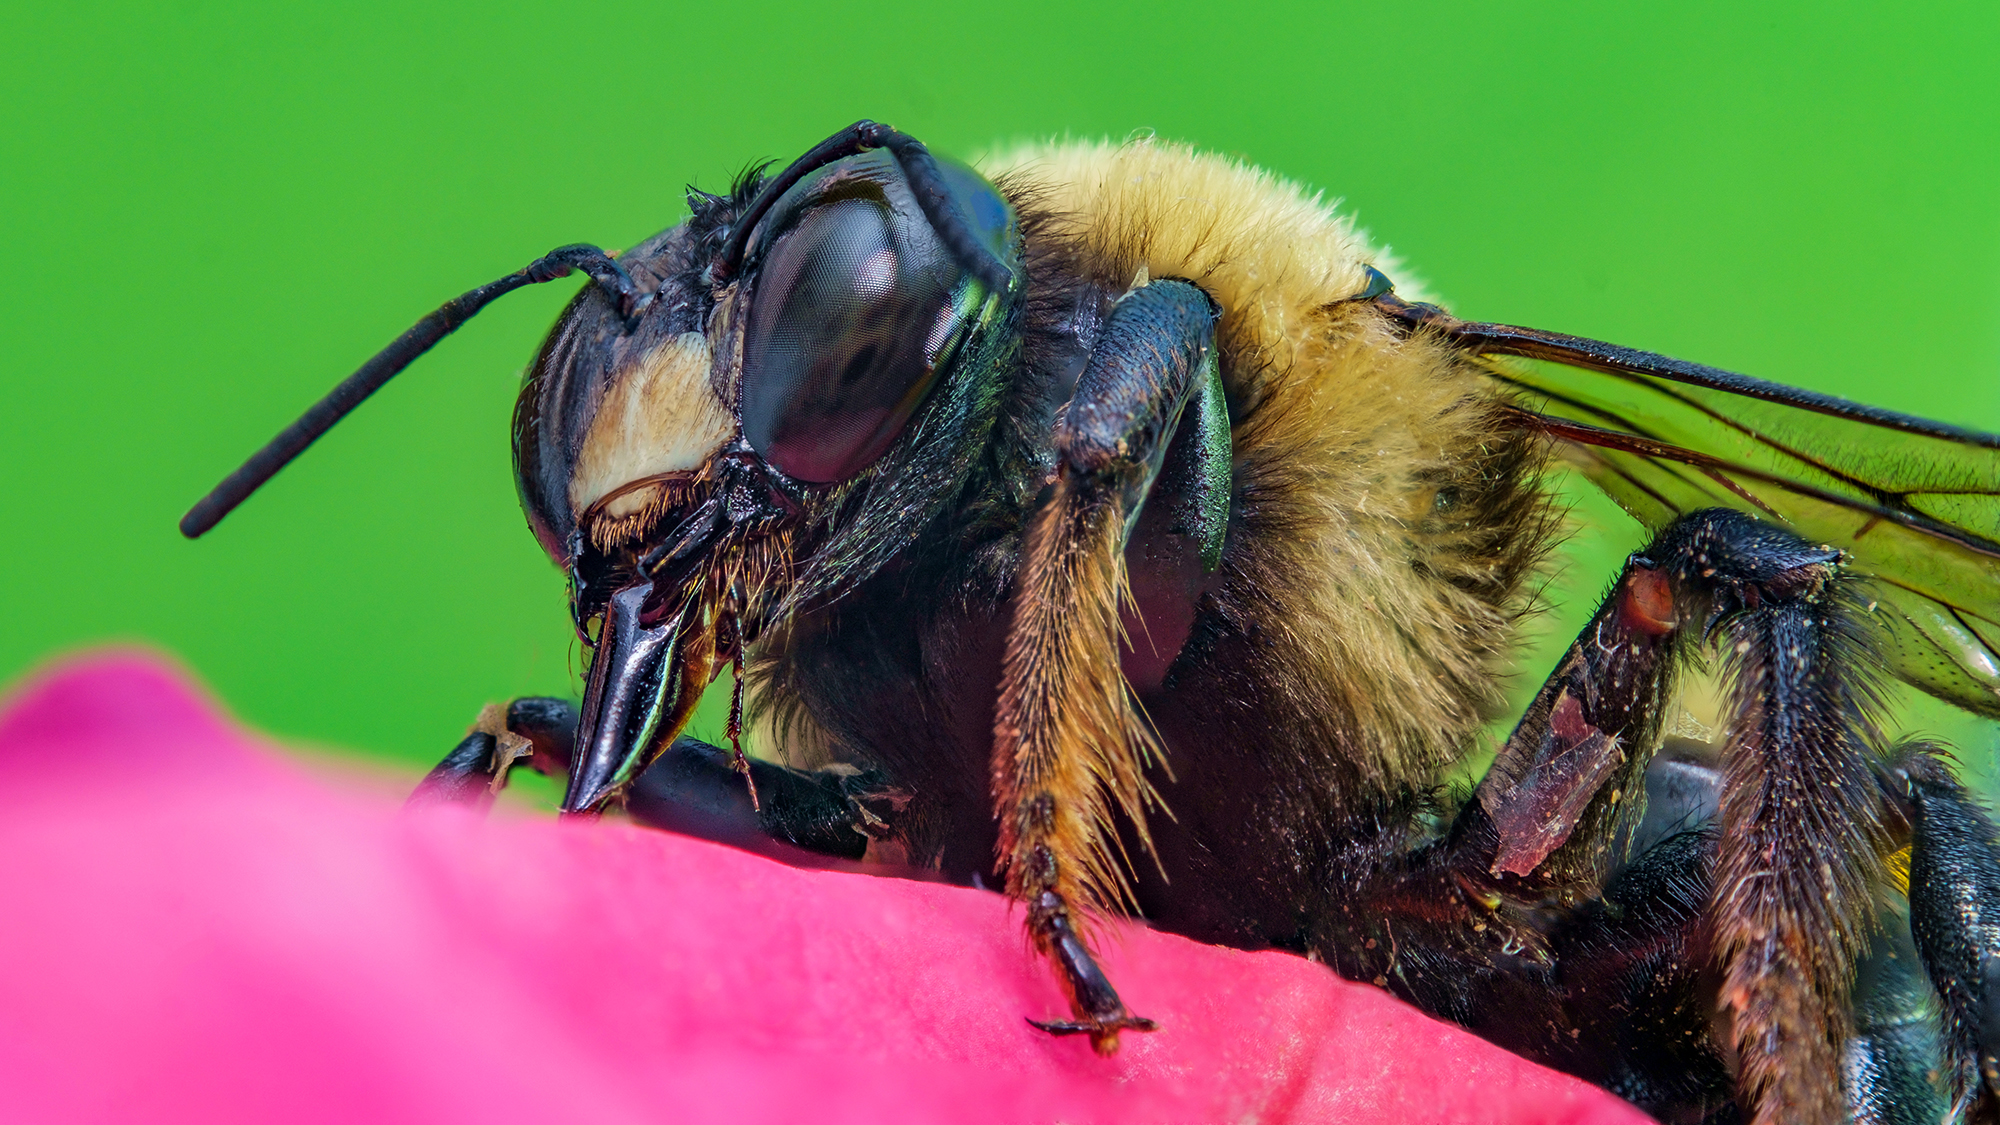 How scientists accidentally discovered that some bees can hibernate underwater